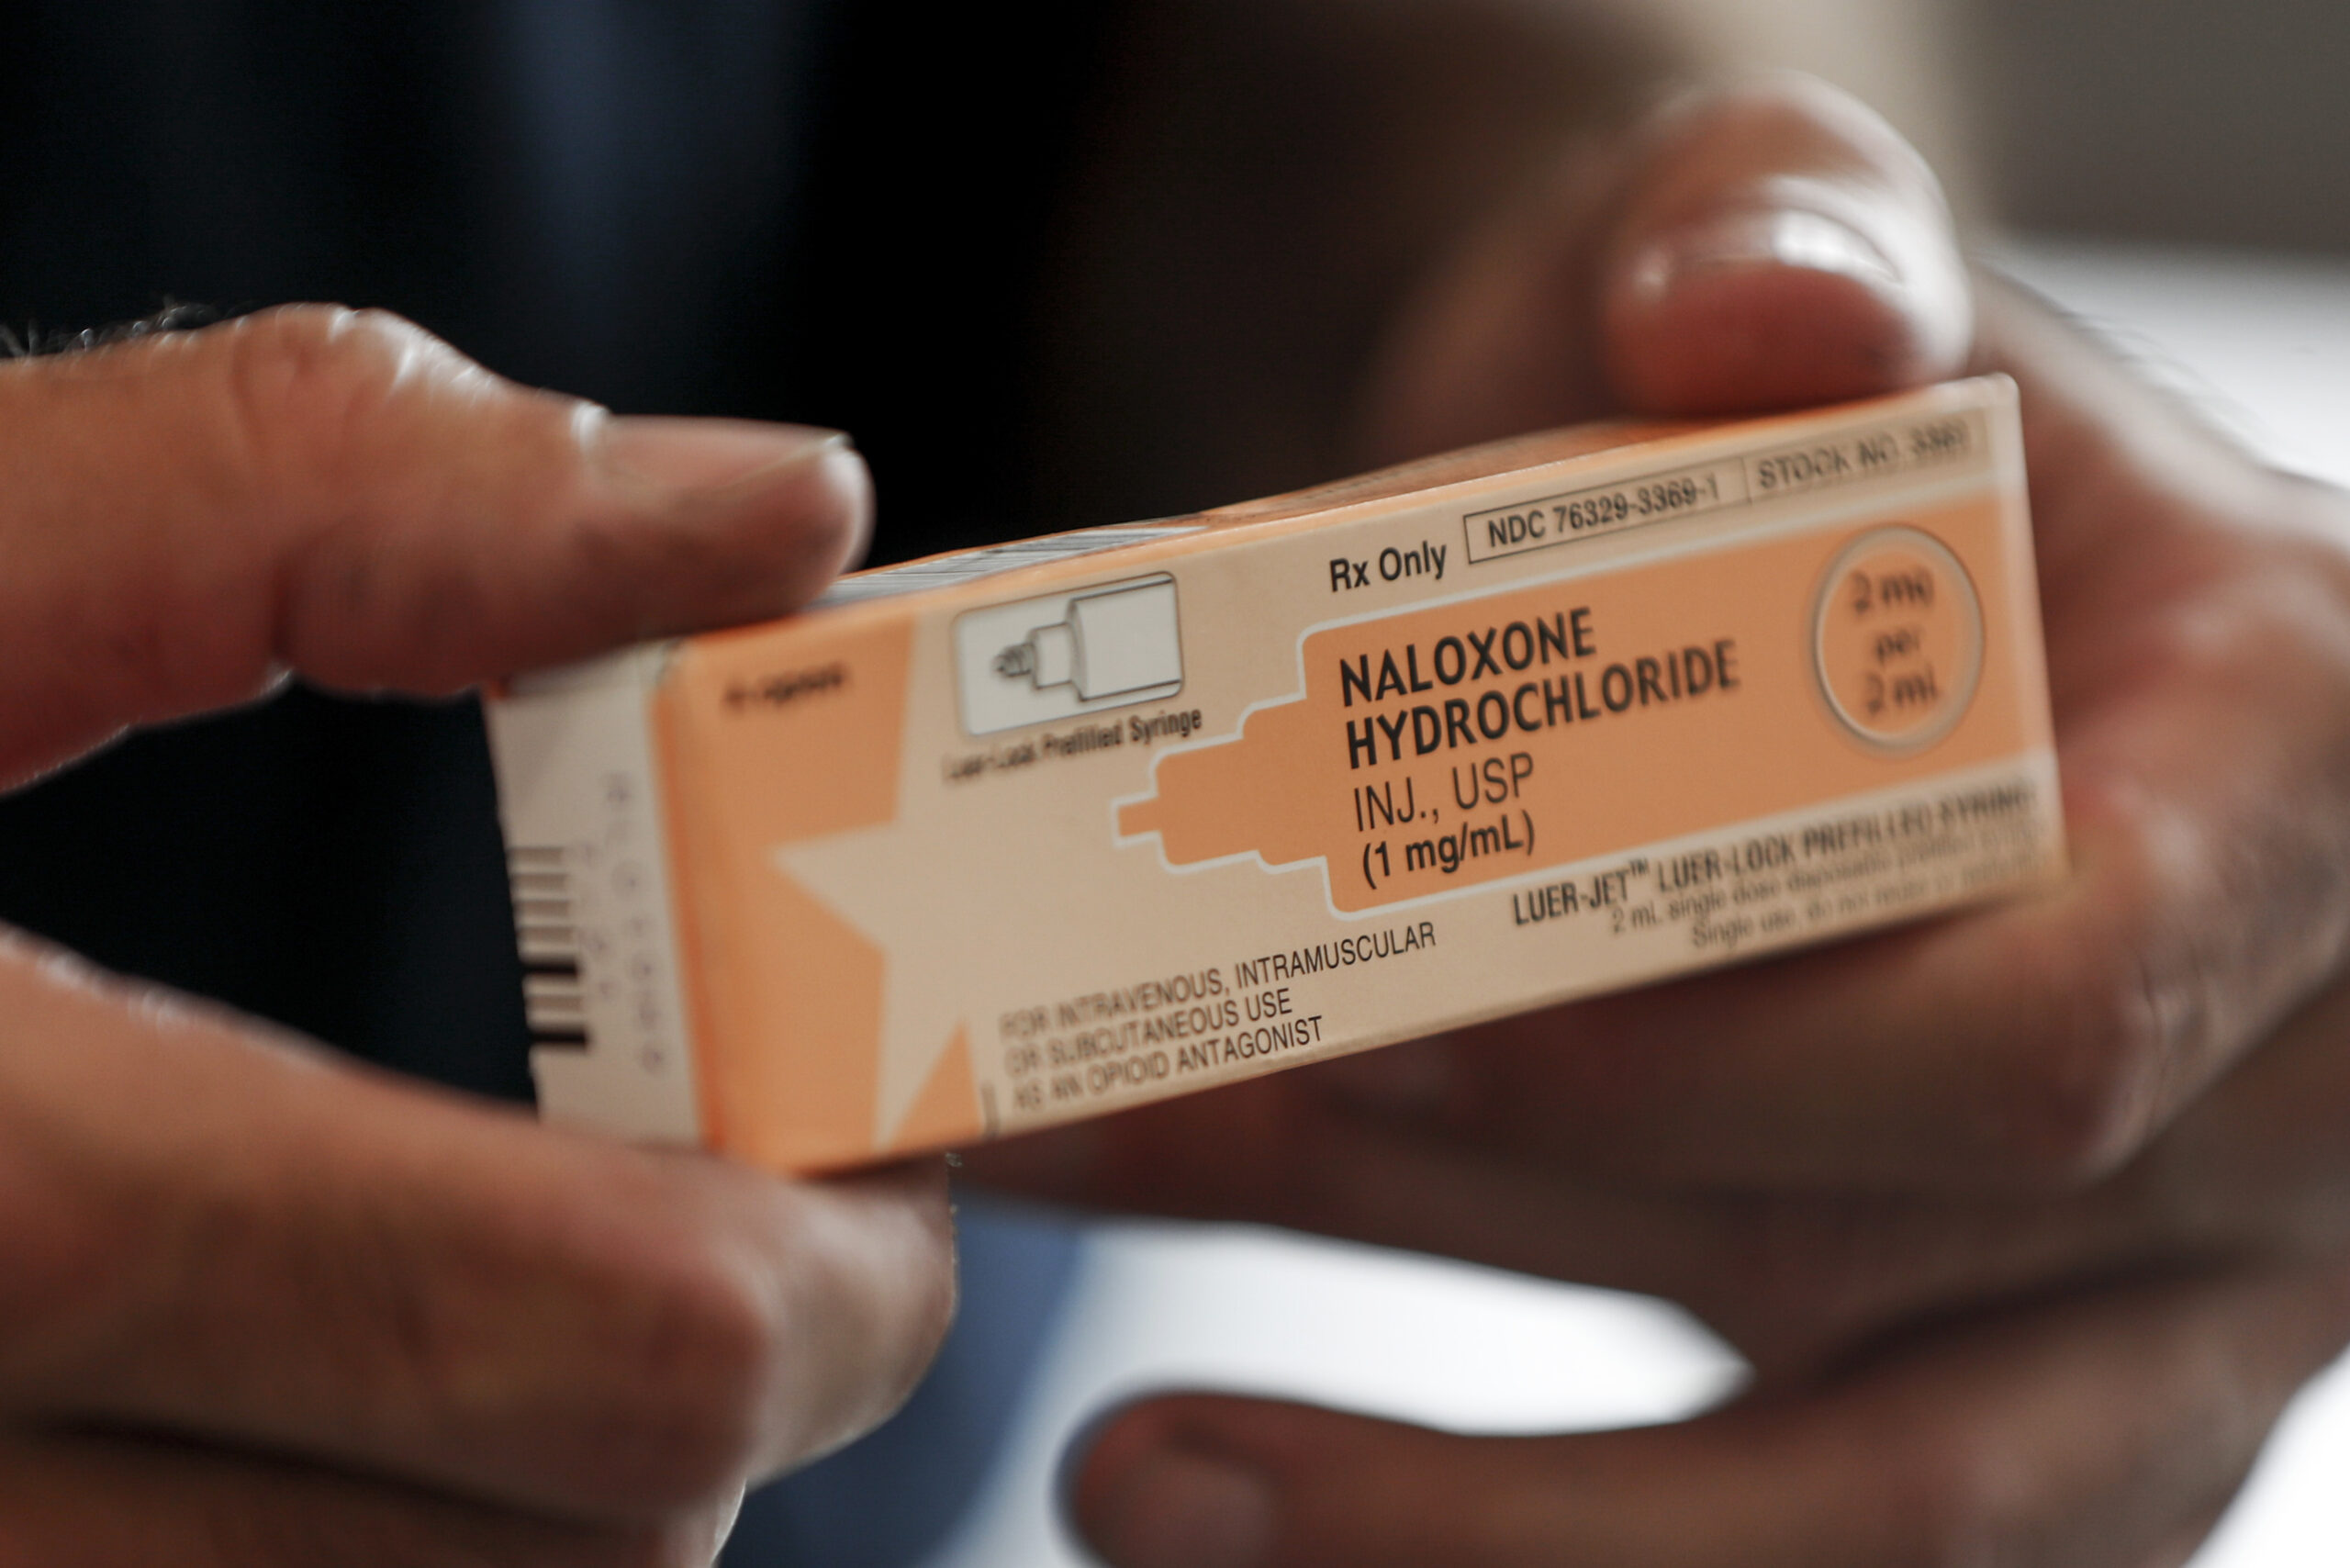 With Overdoses At Record Highs, Naloxone Made Available In Boxes Statewide